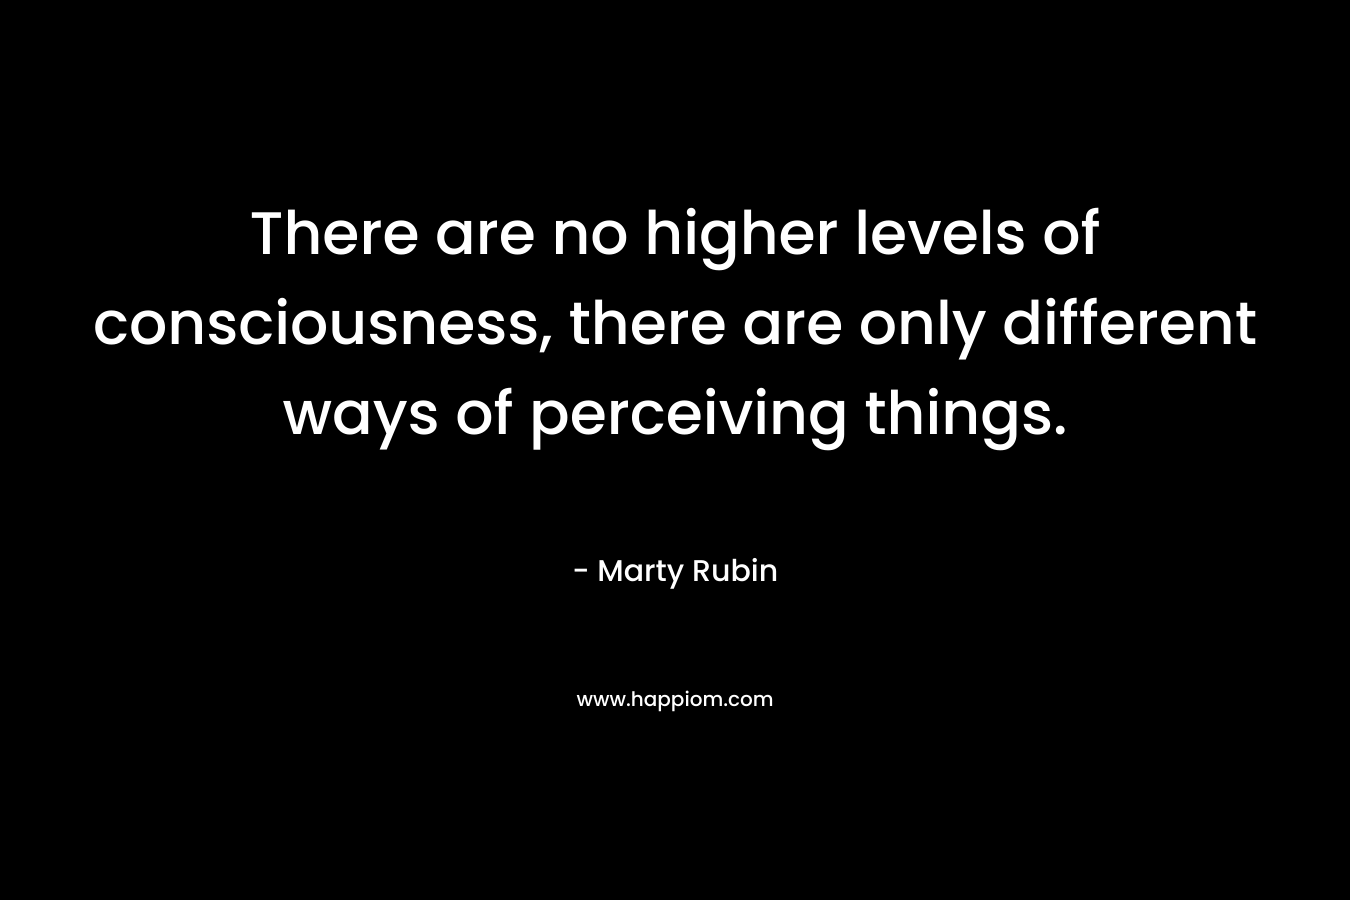 There are no higher levels of consciousness, there are only different ways of perceiving things.